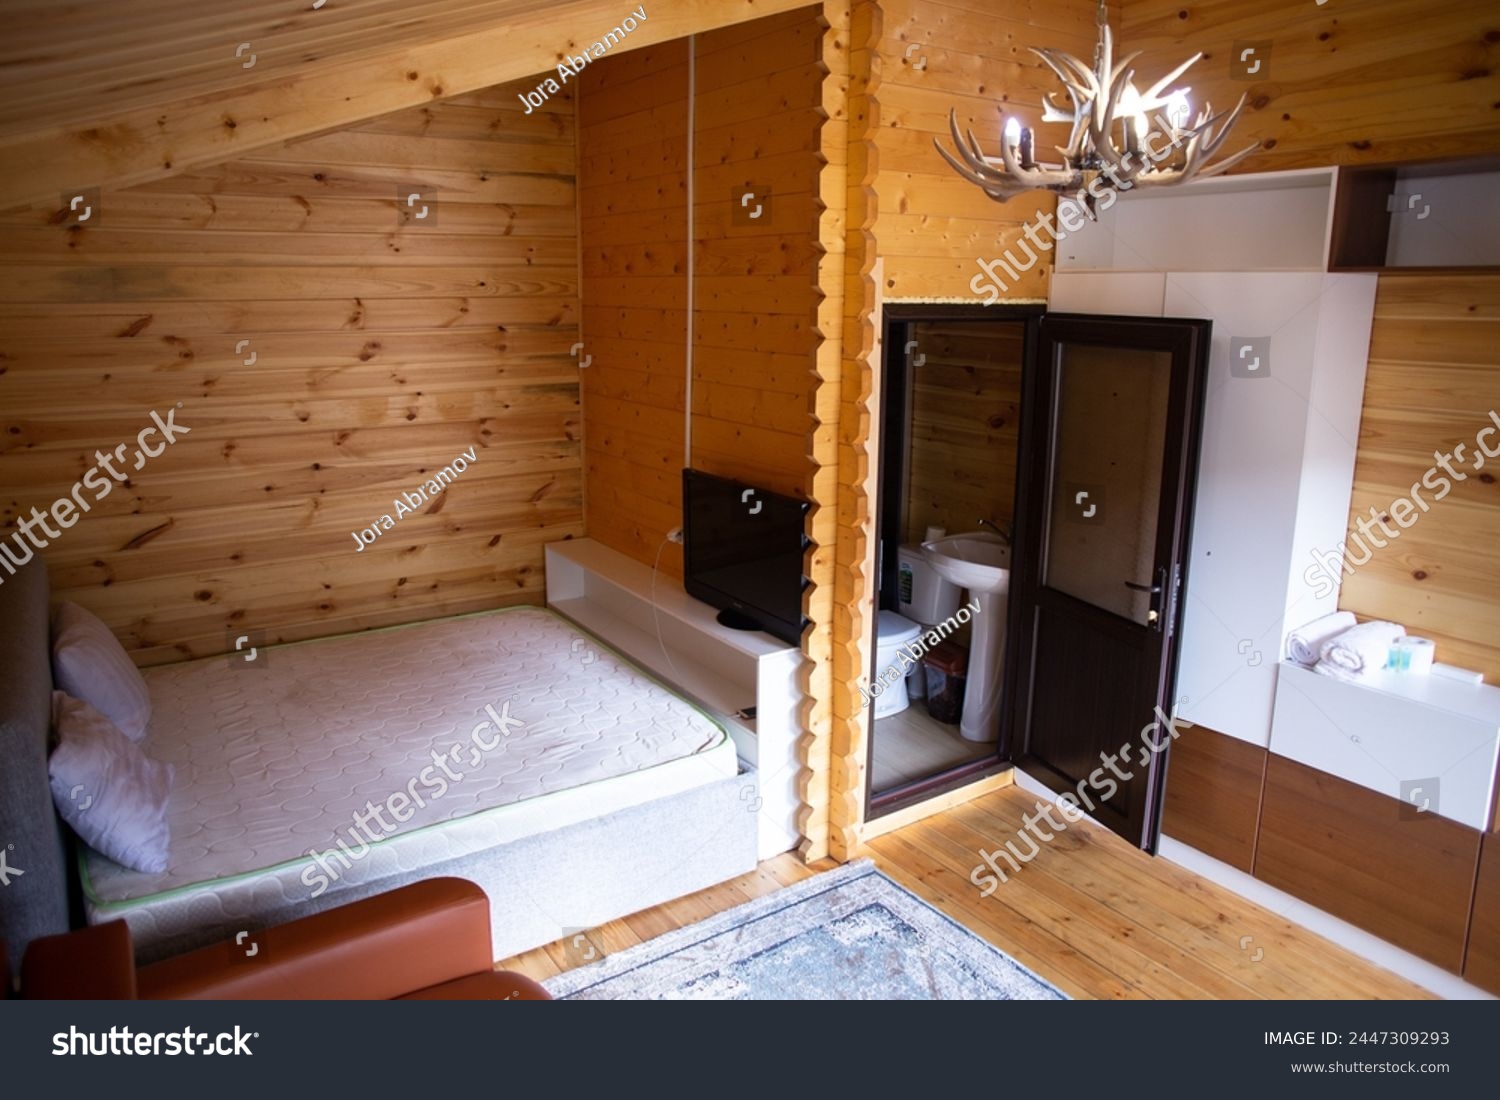 The cabins interior is paneled with wood and furnished with a bed, sofa, and armoire. A bearskin rug adds a touch of warmth to the space. #2447309293